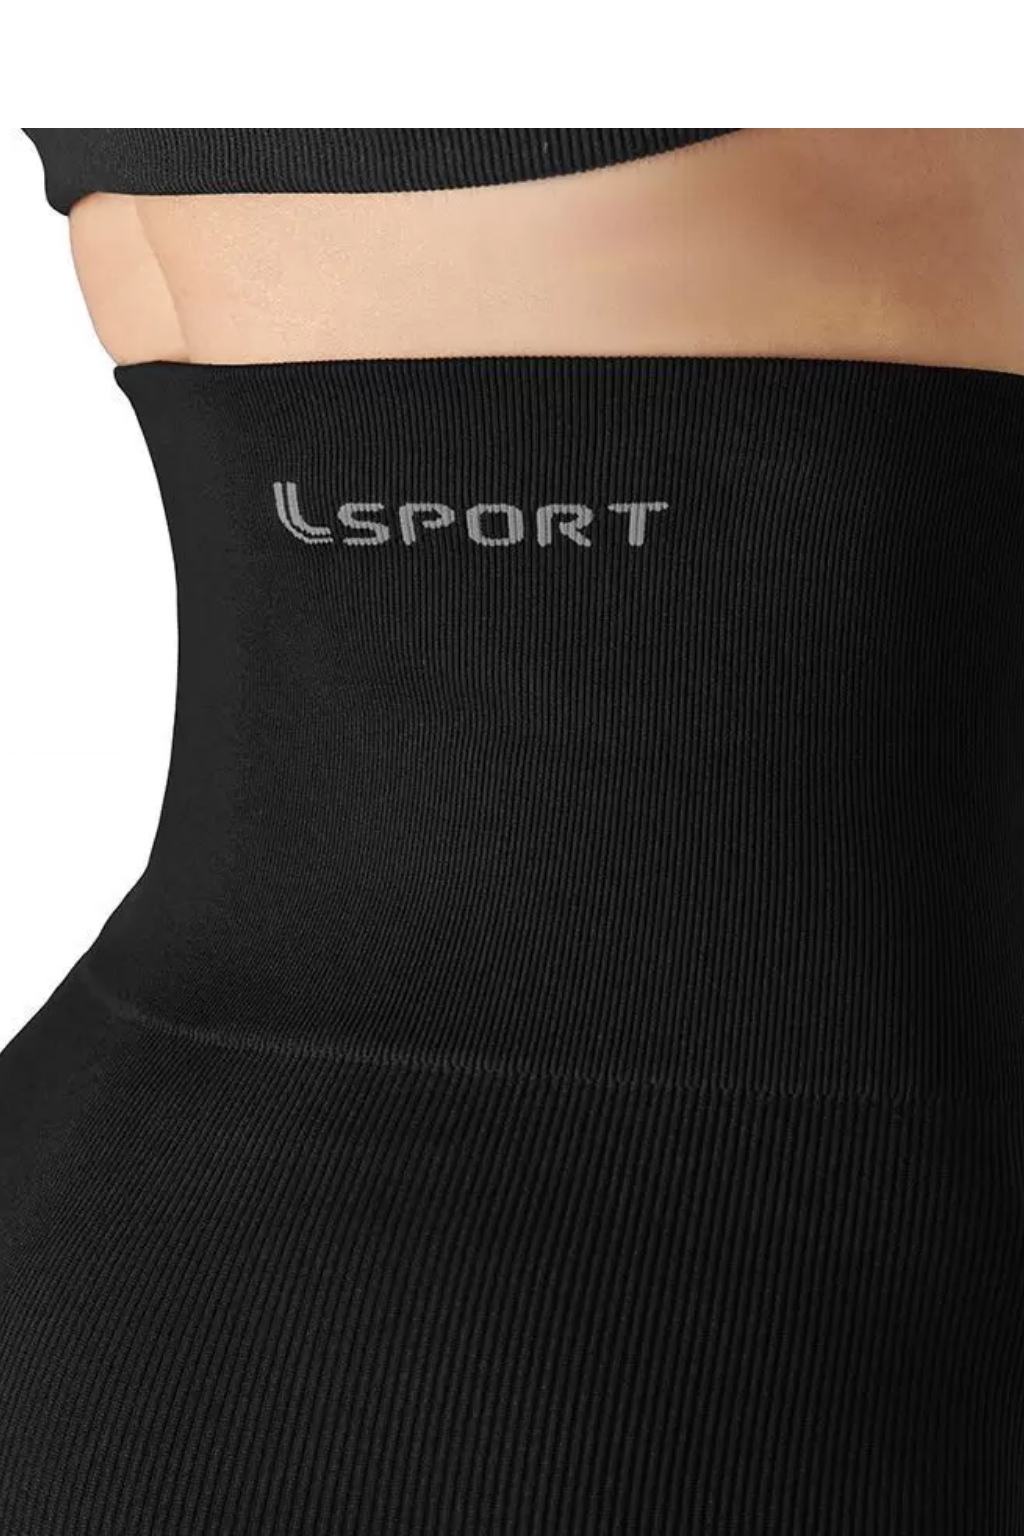 Lupo New Strong Ribbed Sport Legging Fitness Pants